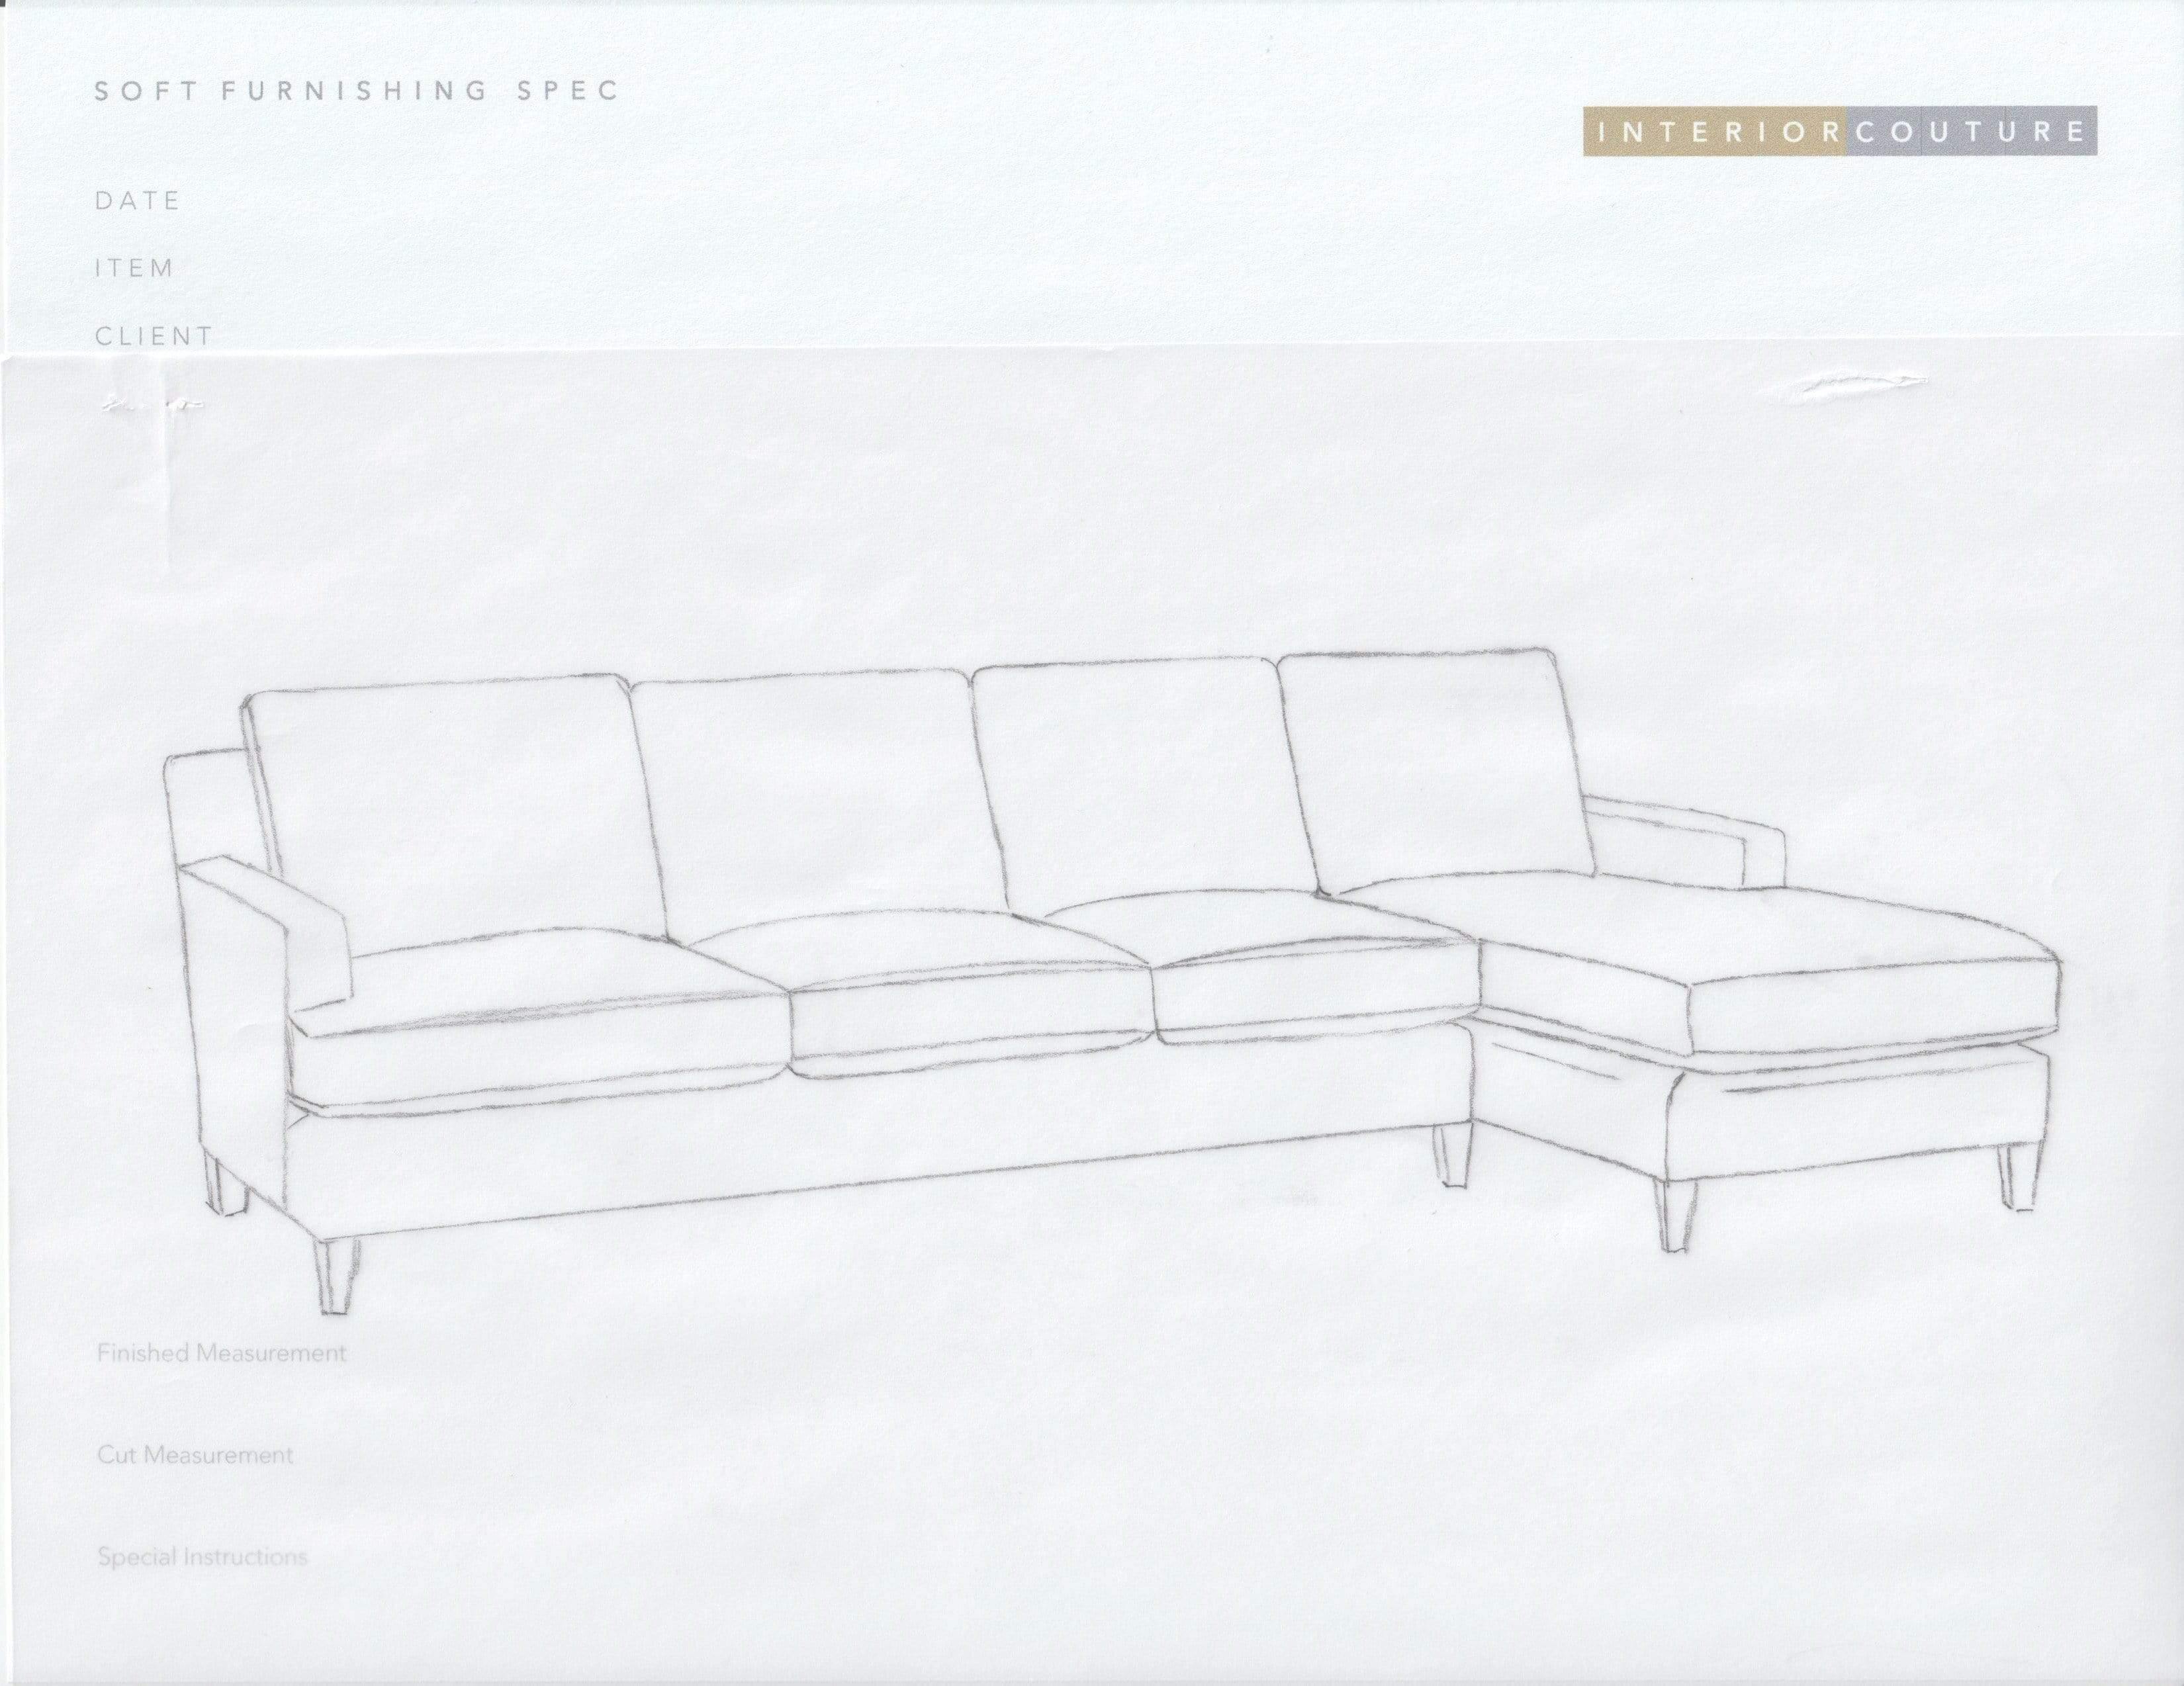 FOUR SEAT SECTIONAL